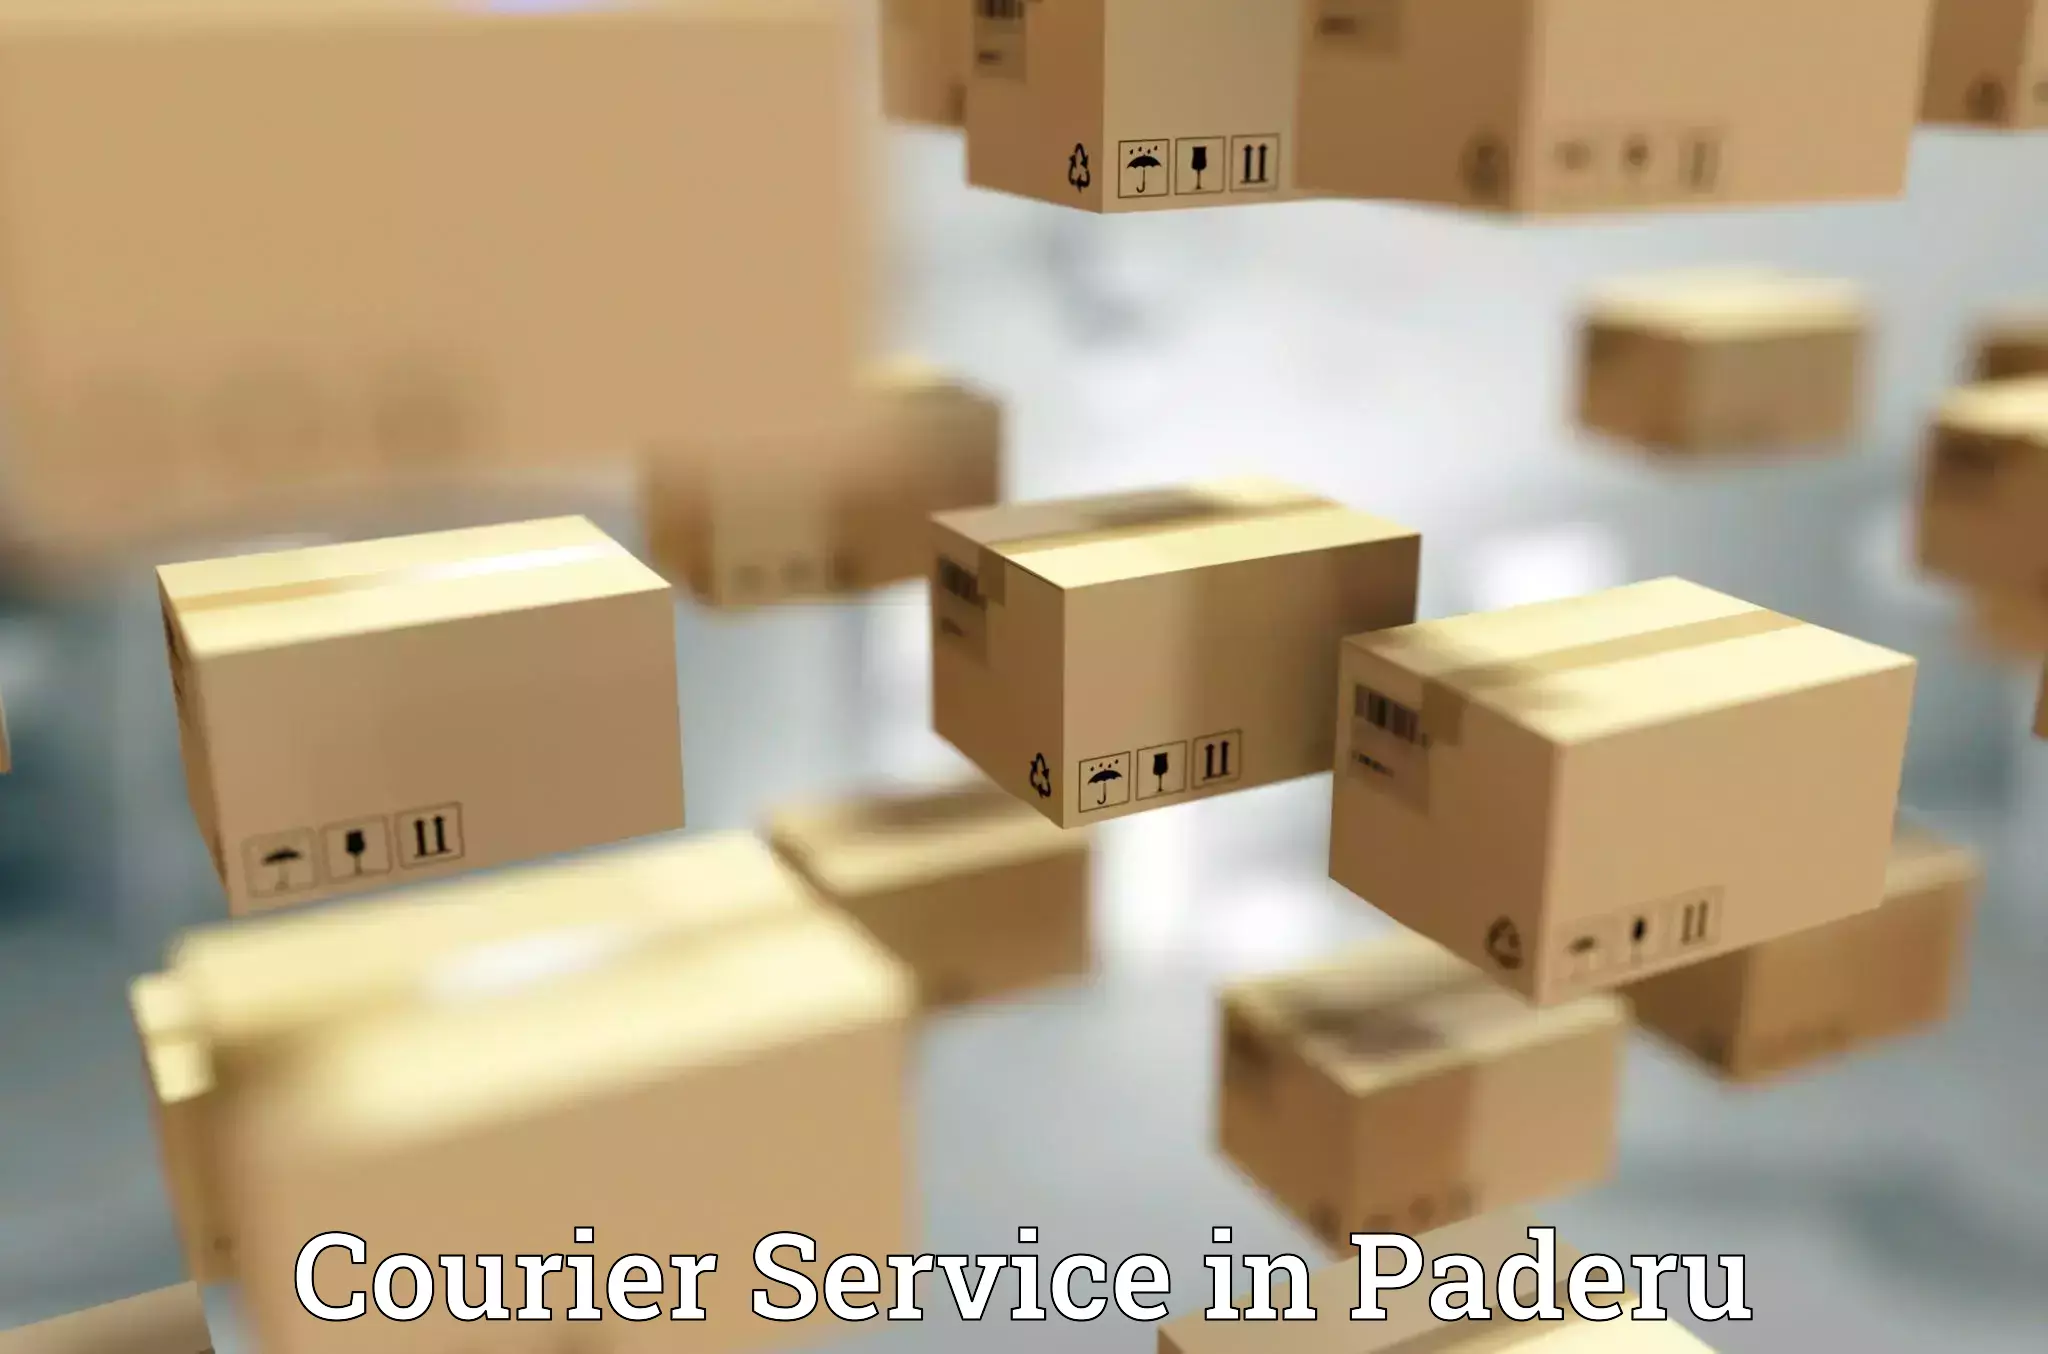 Automated shipping in Paderu